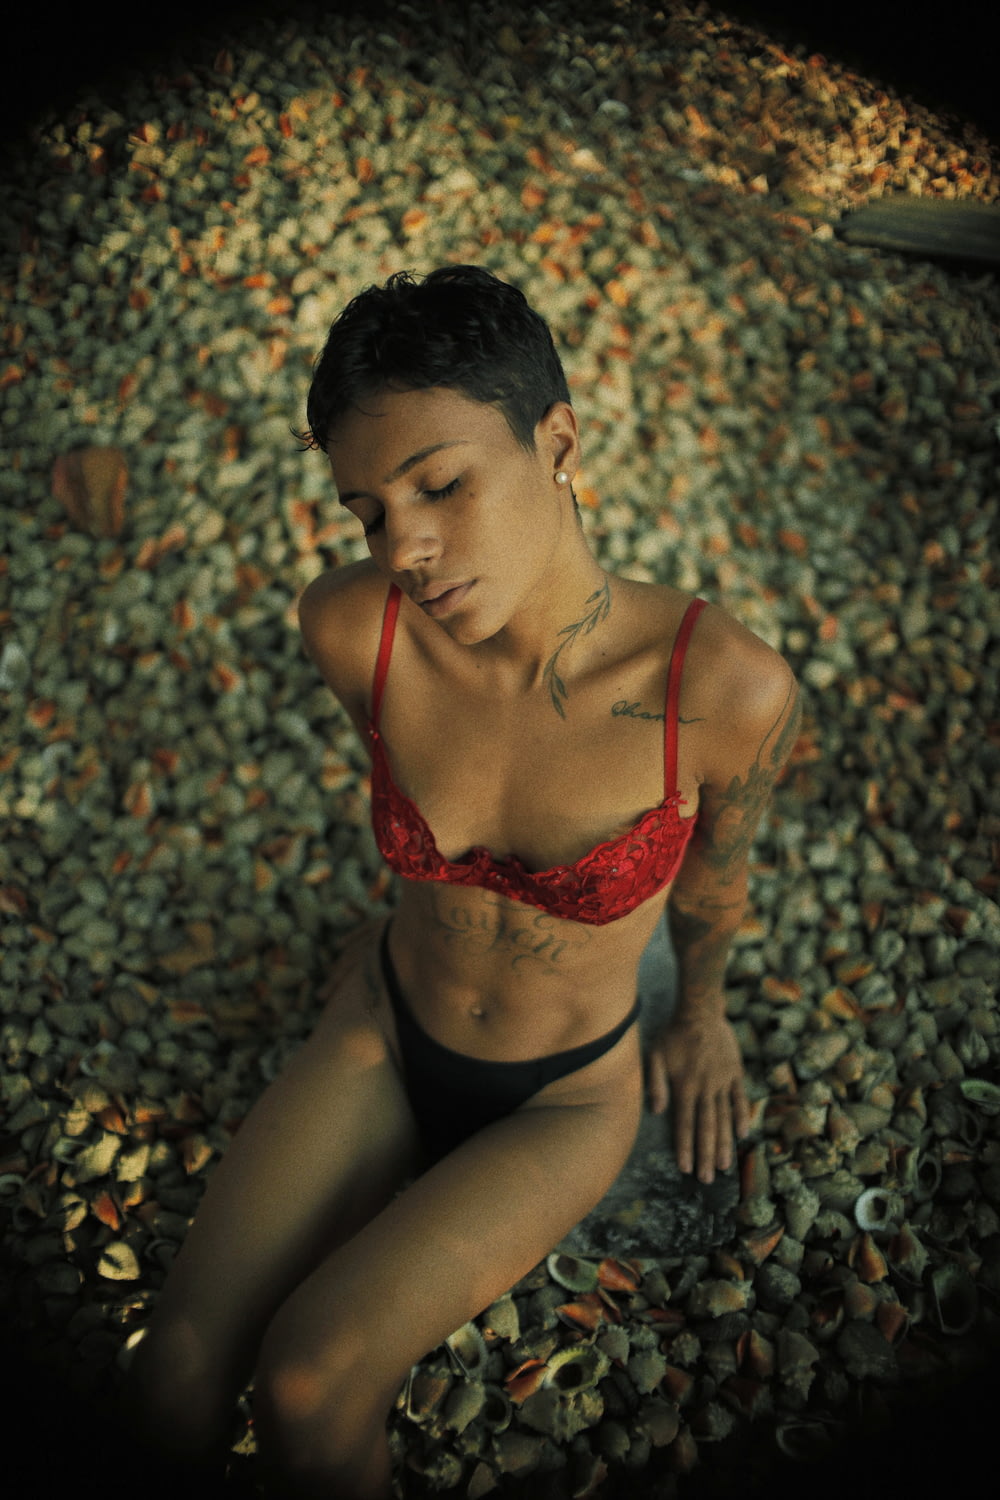 woman in red brassiere and black panty sitting on ground